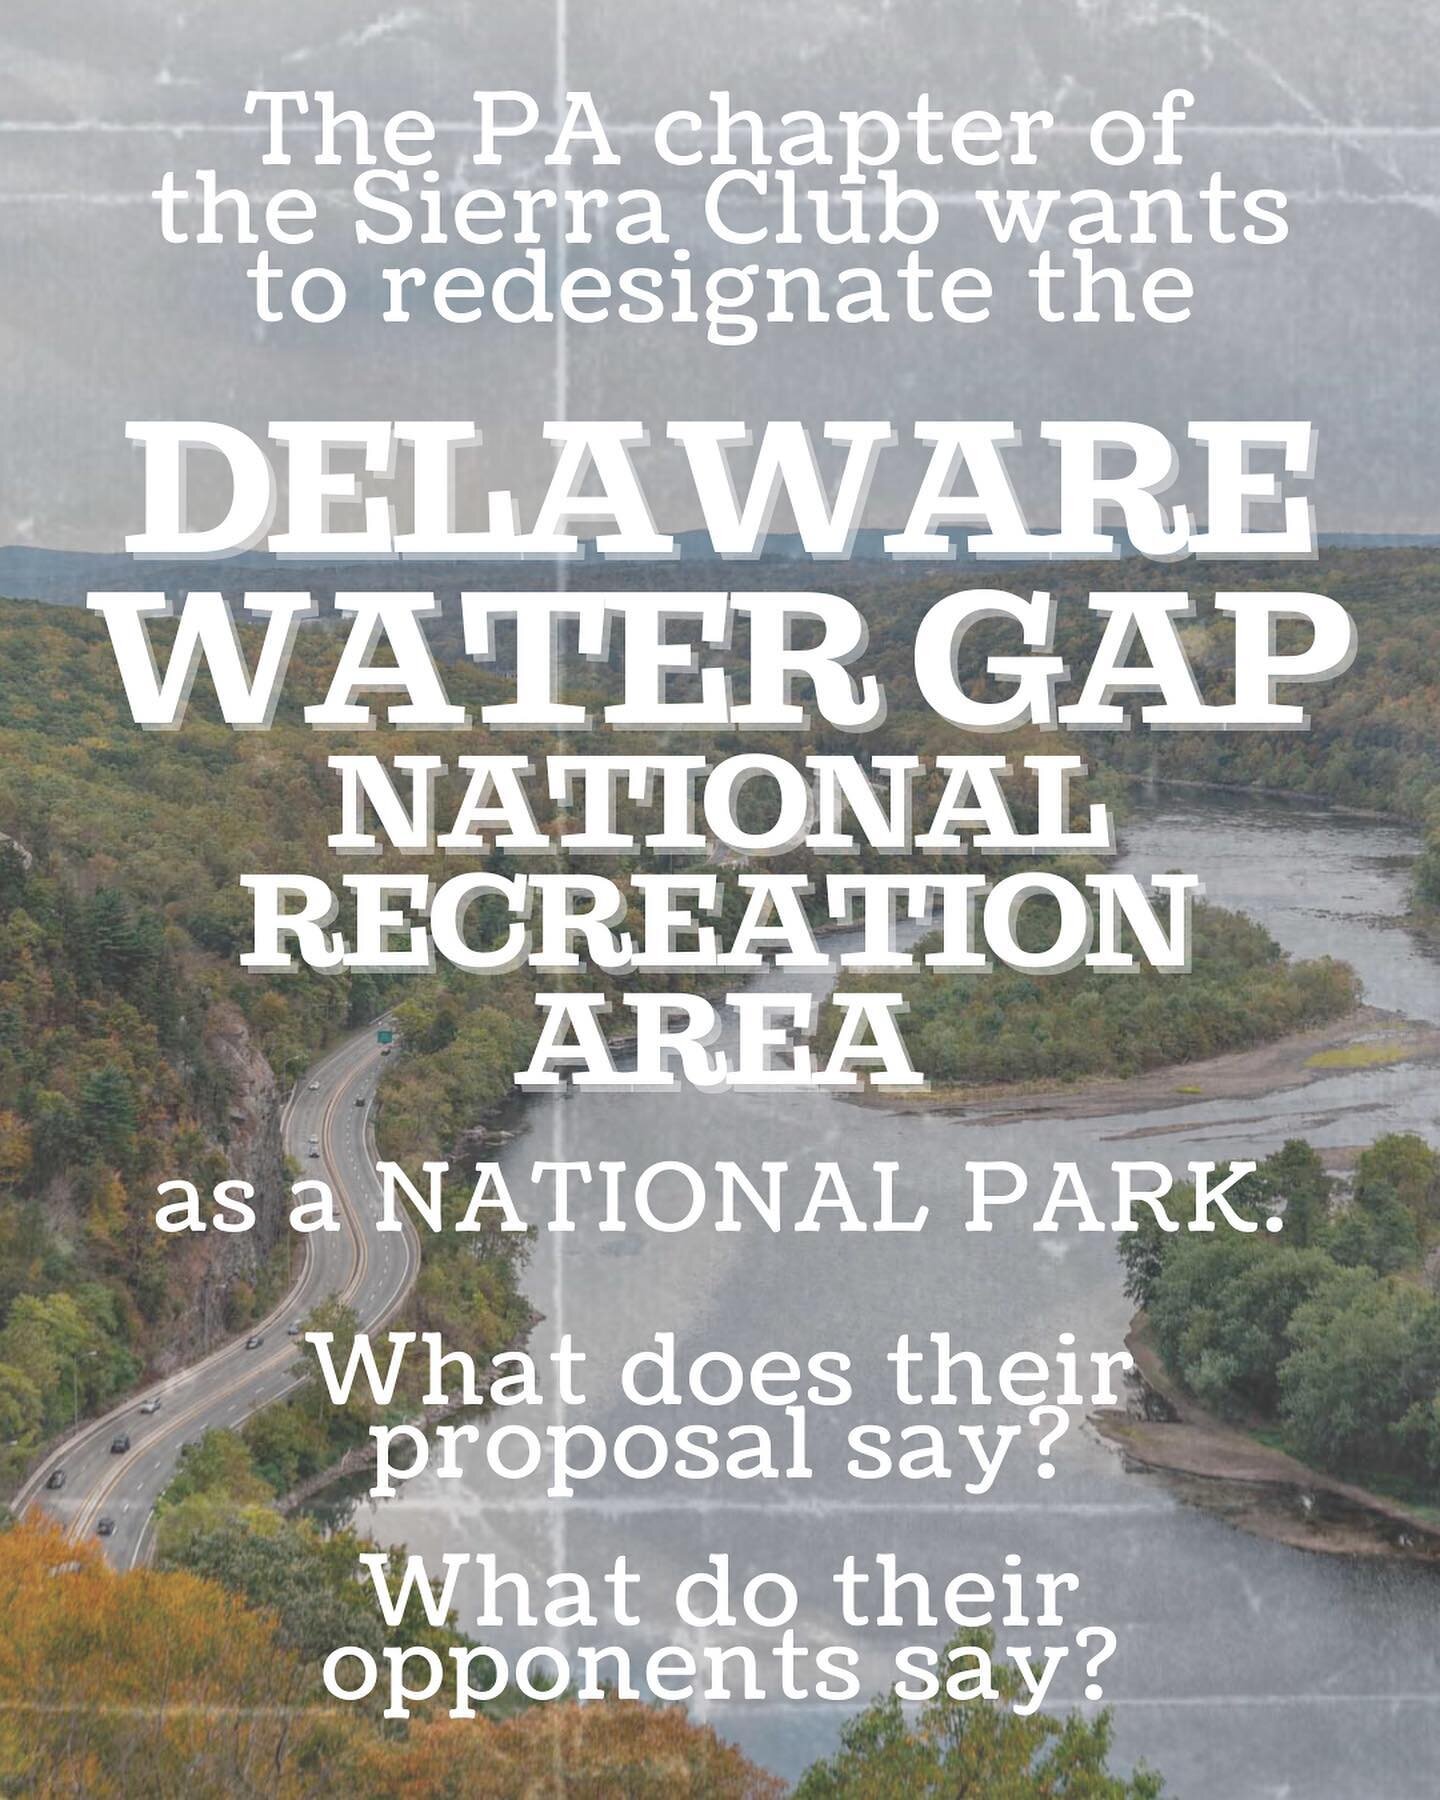 We&rsquo;ll be posting over the next few weeks about a proposal to redesignate the Delaware Water Gap National Recreation Area as a National Park.  We&rsquo;ll be explaining who is for and who is against the proposal, and sharing some of the argument